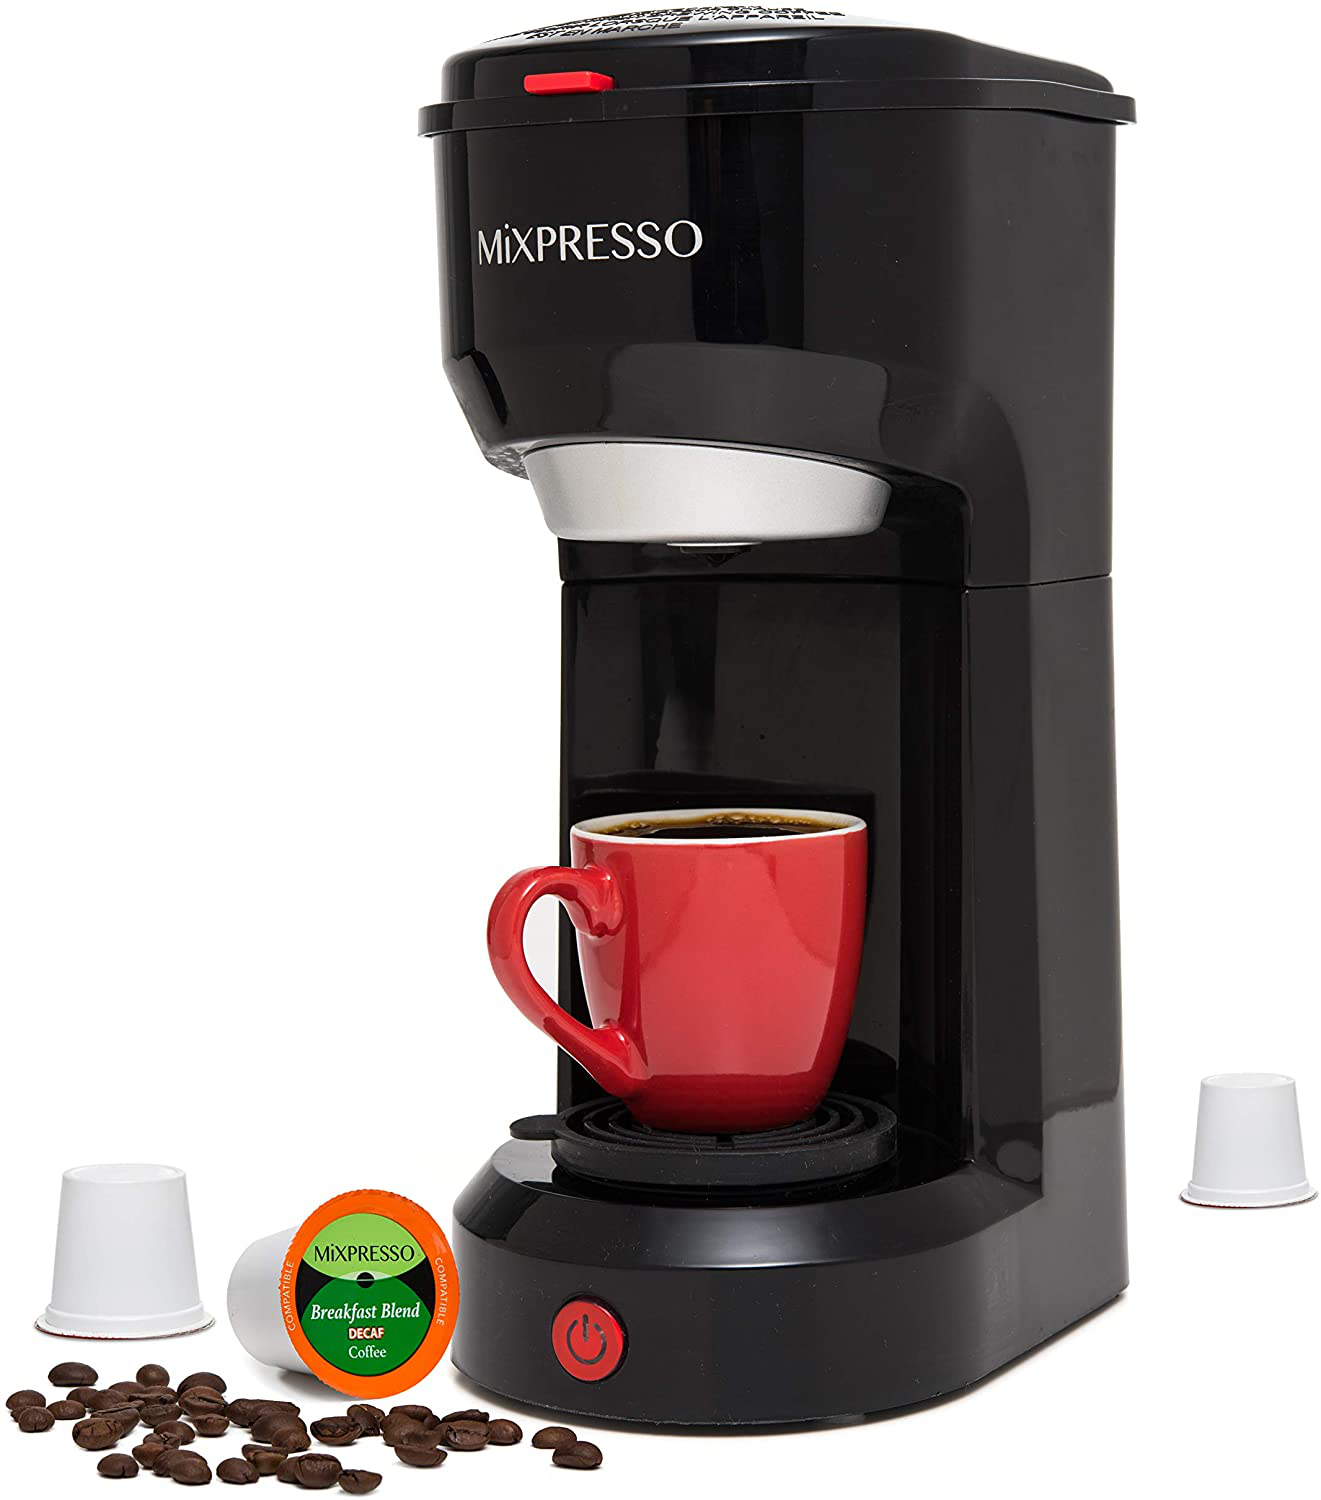 Mixpresso 2 in 1 Coffee Brewer, Single Serve Coffee Maker K Cup Compatible & Ground Coffee, Personal Coffee Maker ,Compact Size Mini Coffee Maker, Quick Brew Technology (14 oz) (Red)